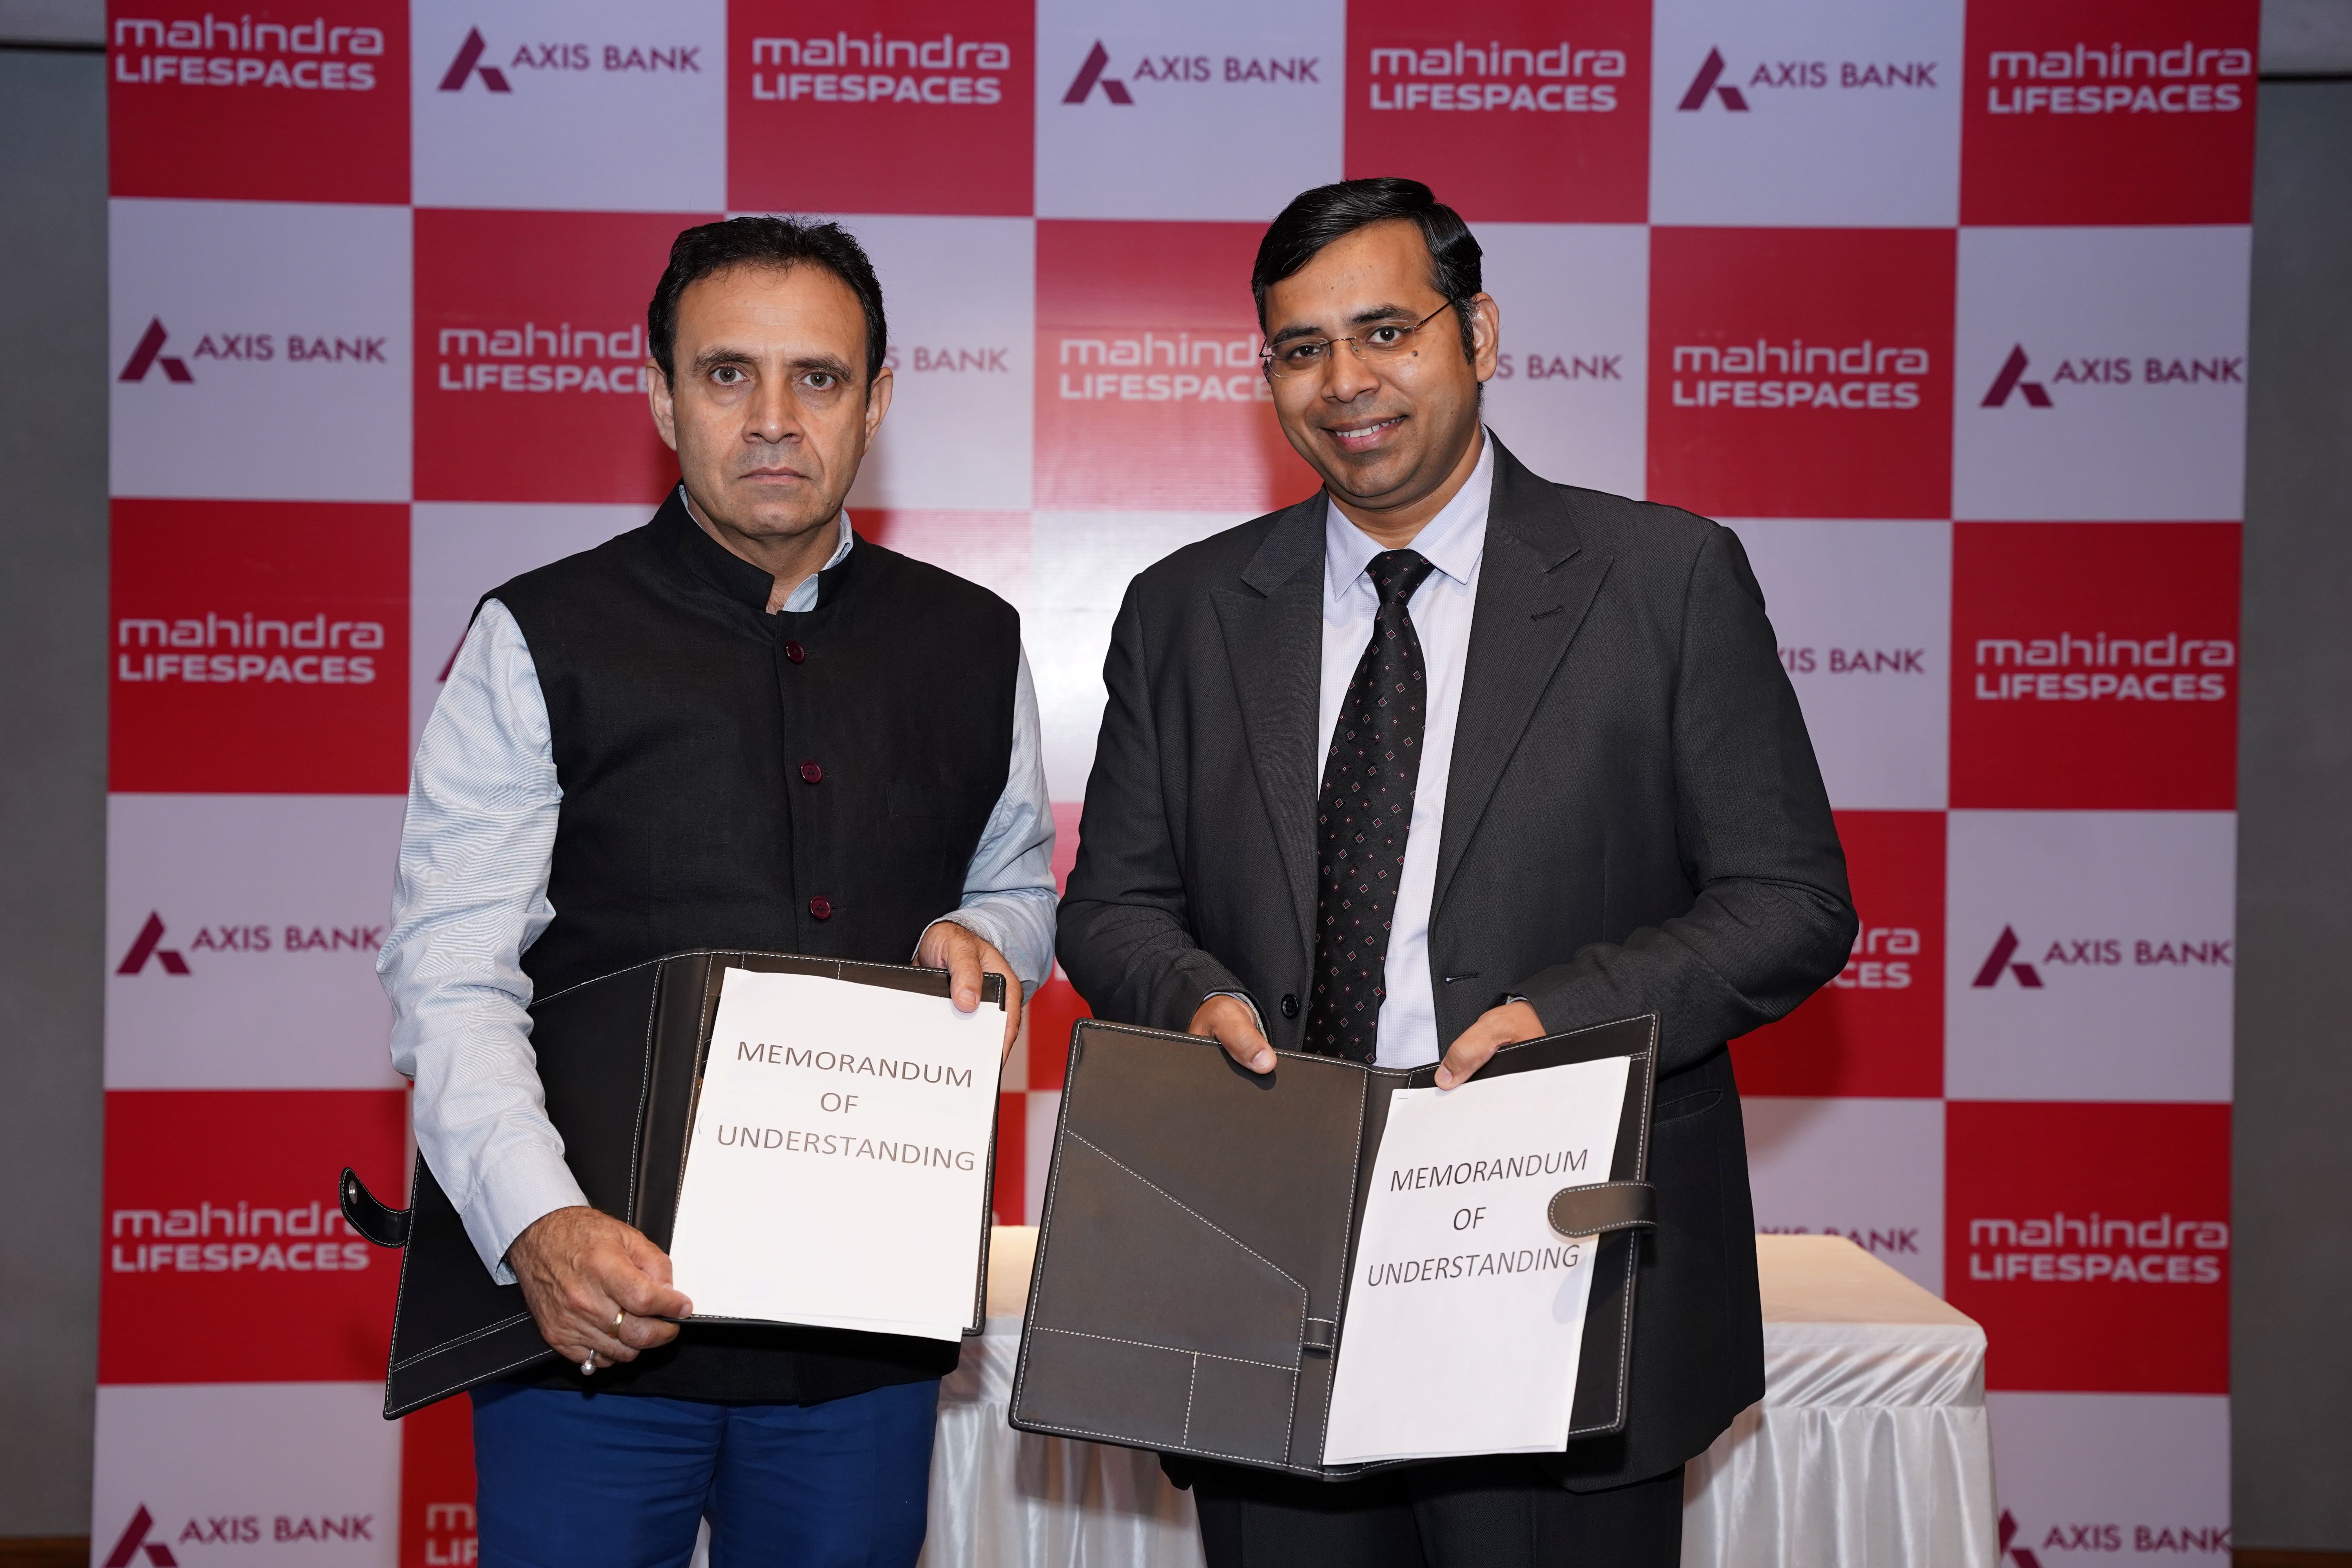 Axis Bank partners with Mahindra Lifespaces to provide Home loans for Green Homes 